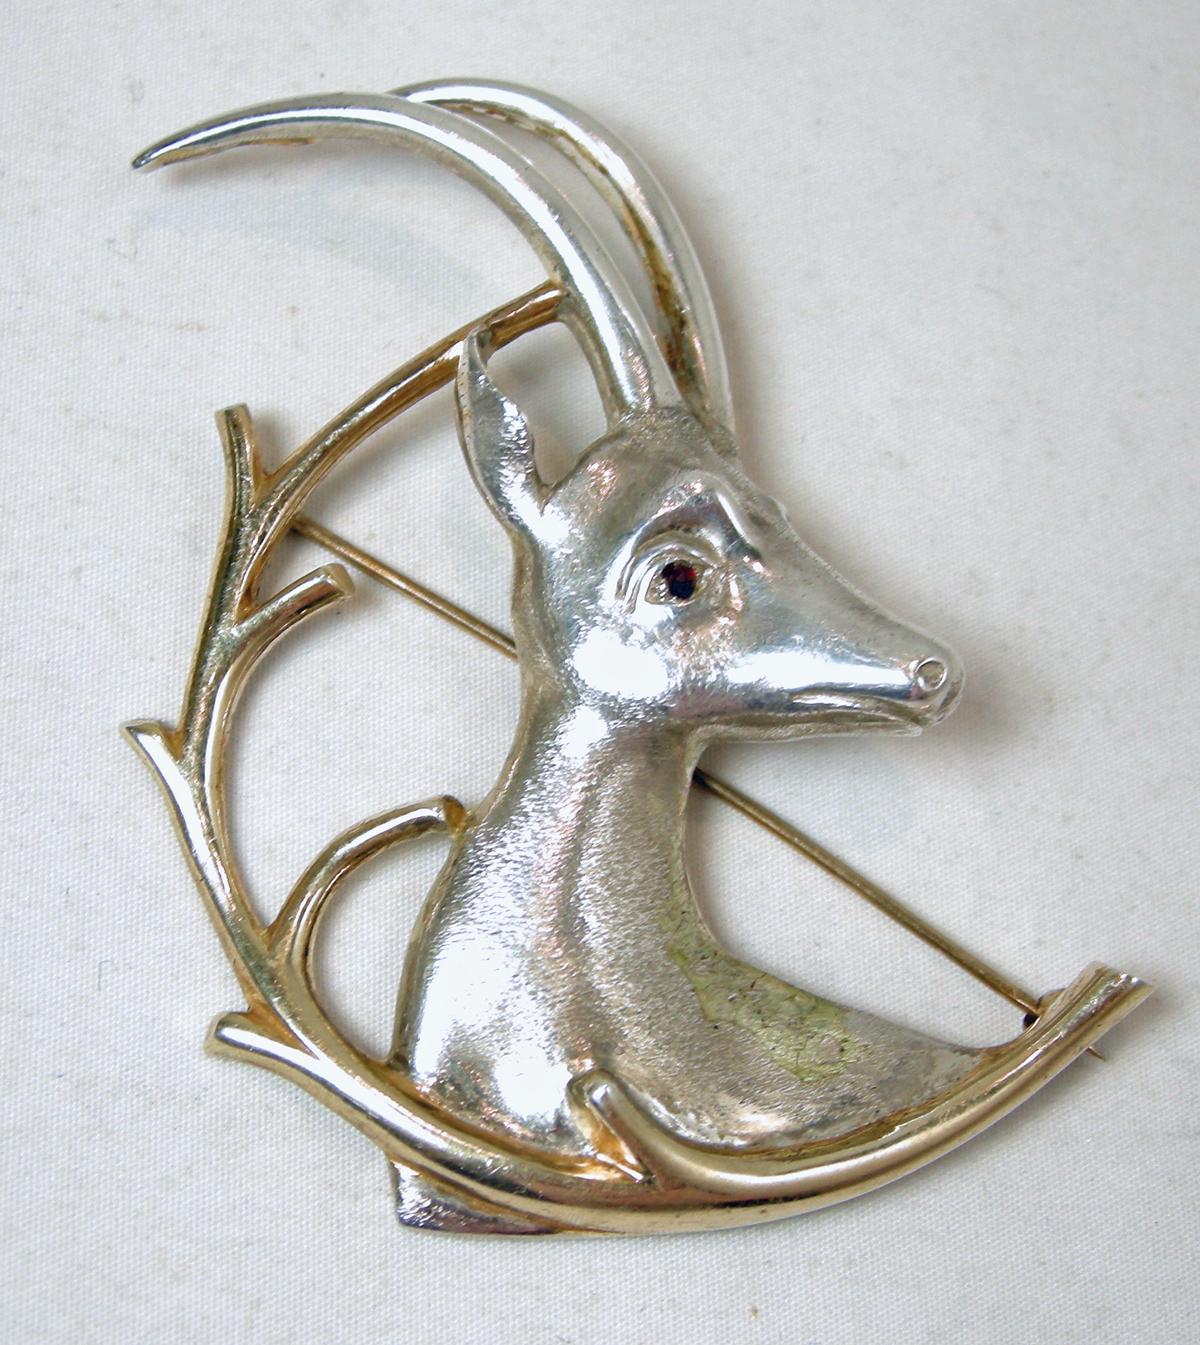 This rare vintage Ibex brooch is a superb work of sterling art.  The Ibex is a member of the European mountain goat family. The workmanship catches your eye immediately. It has red crystal eyes. In excellent condition, this brooch measures 2-7/8” x